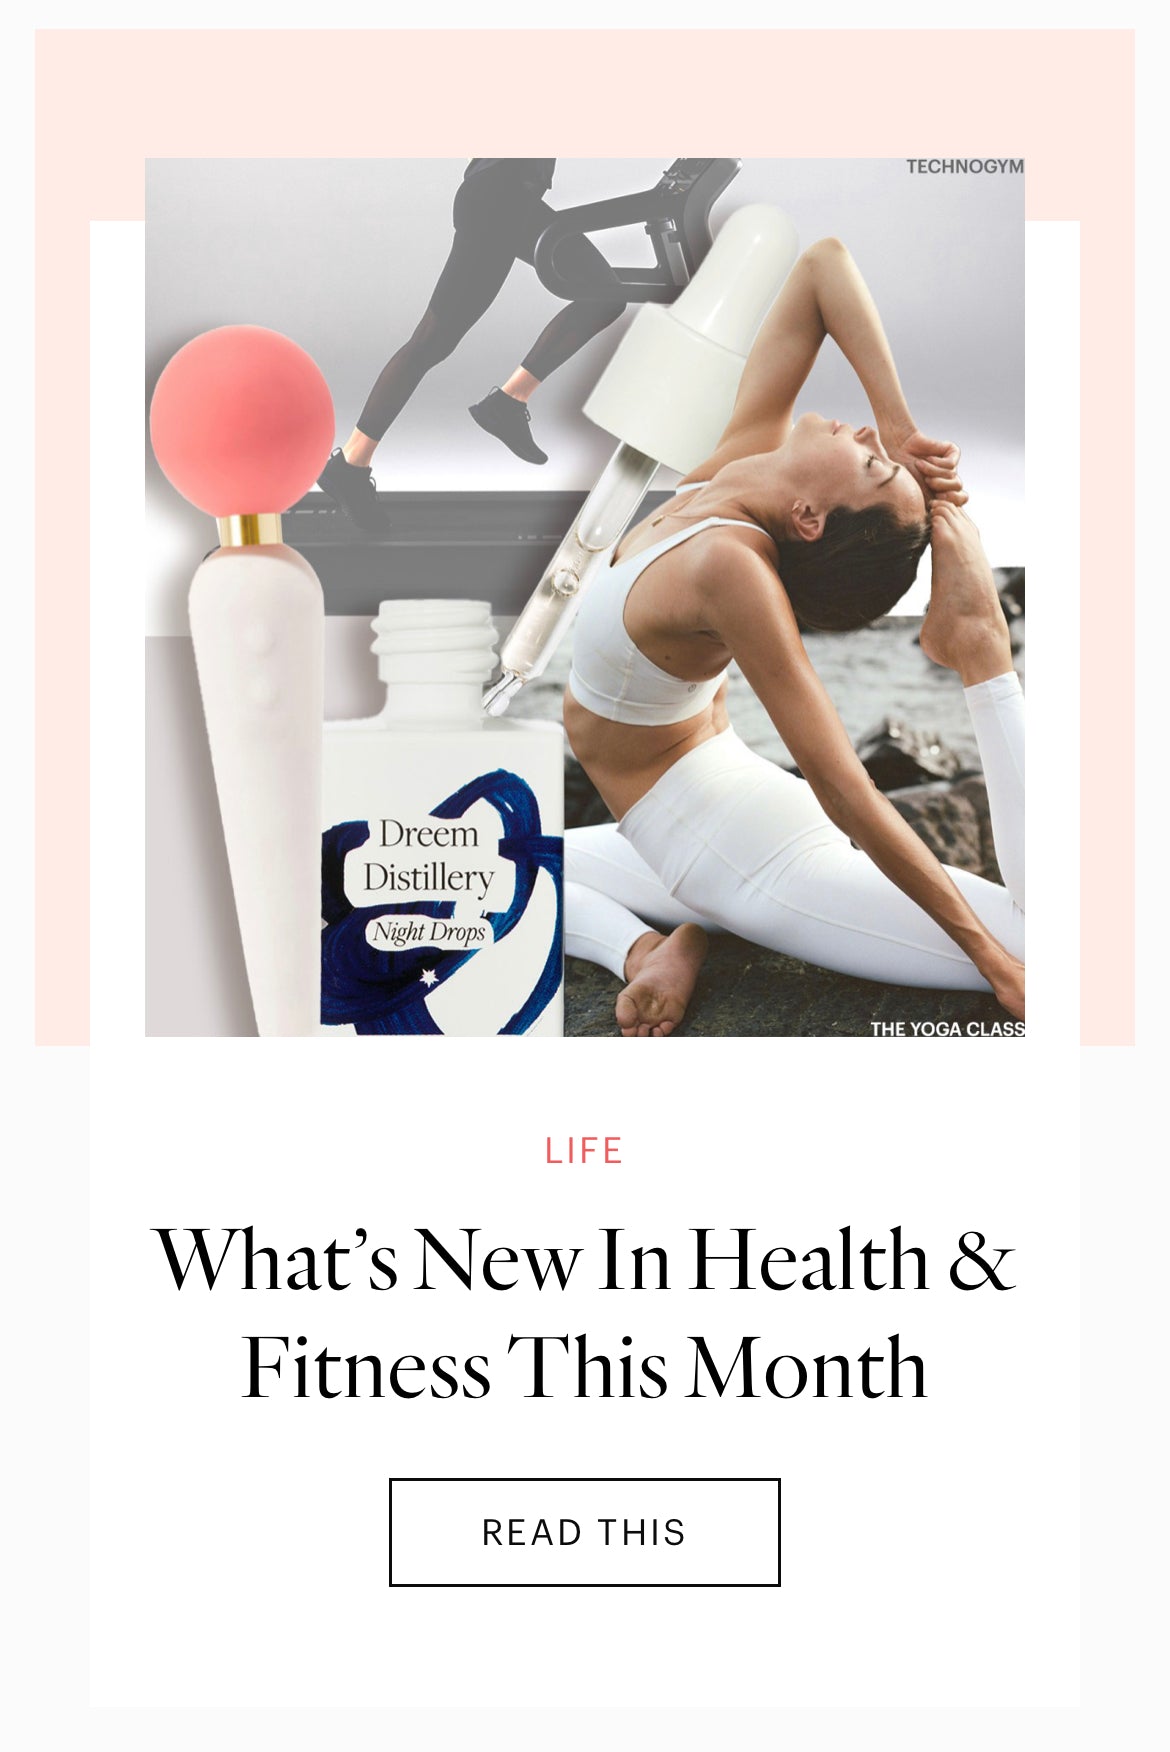 Spritz Wellness in this months Sheerluxe Health and Fitness List